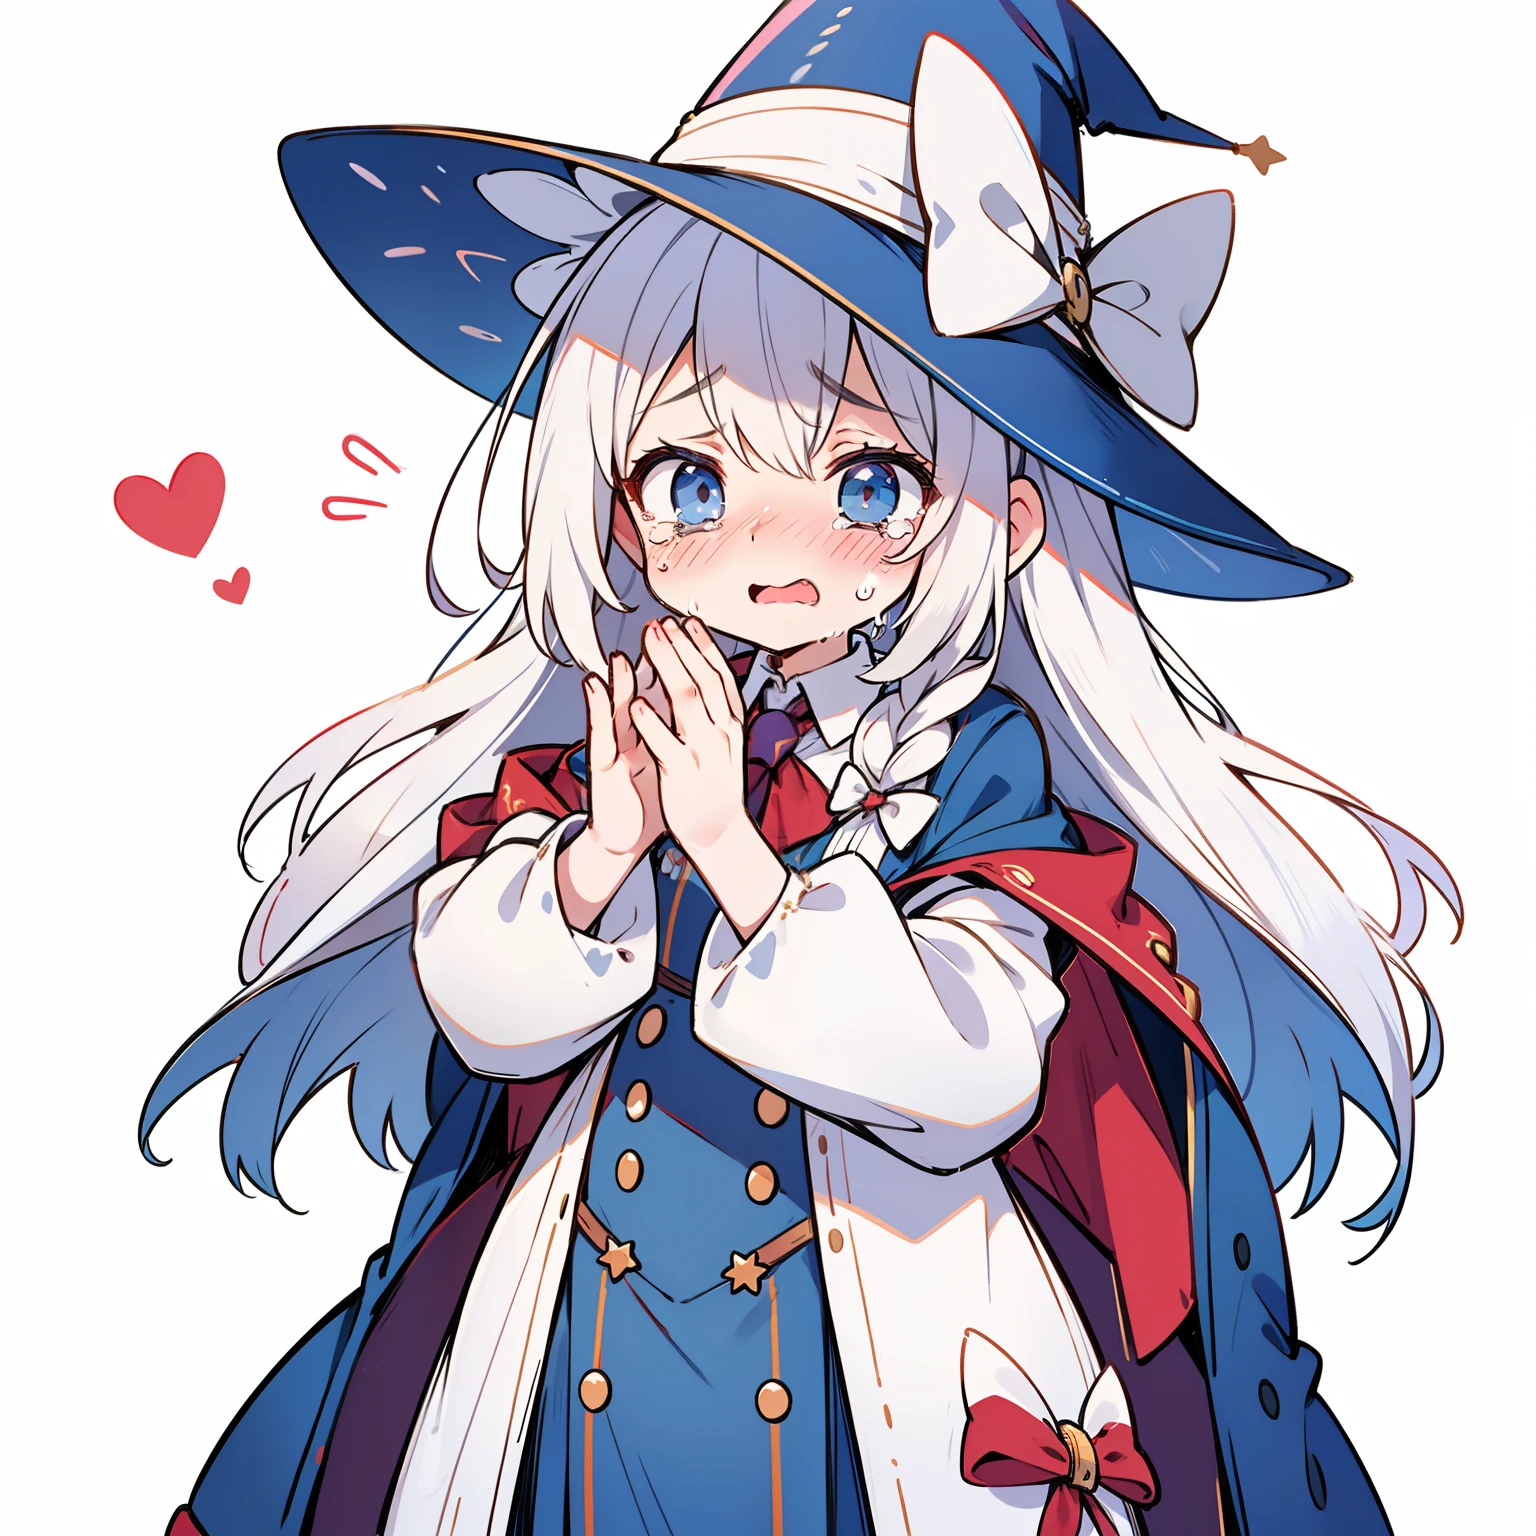 A  magician in clothes that are far too big for her, embarrassed expression, crying, teary eyes, loose clothes, magician's hat